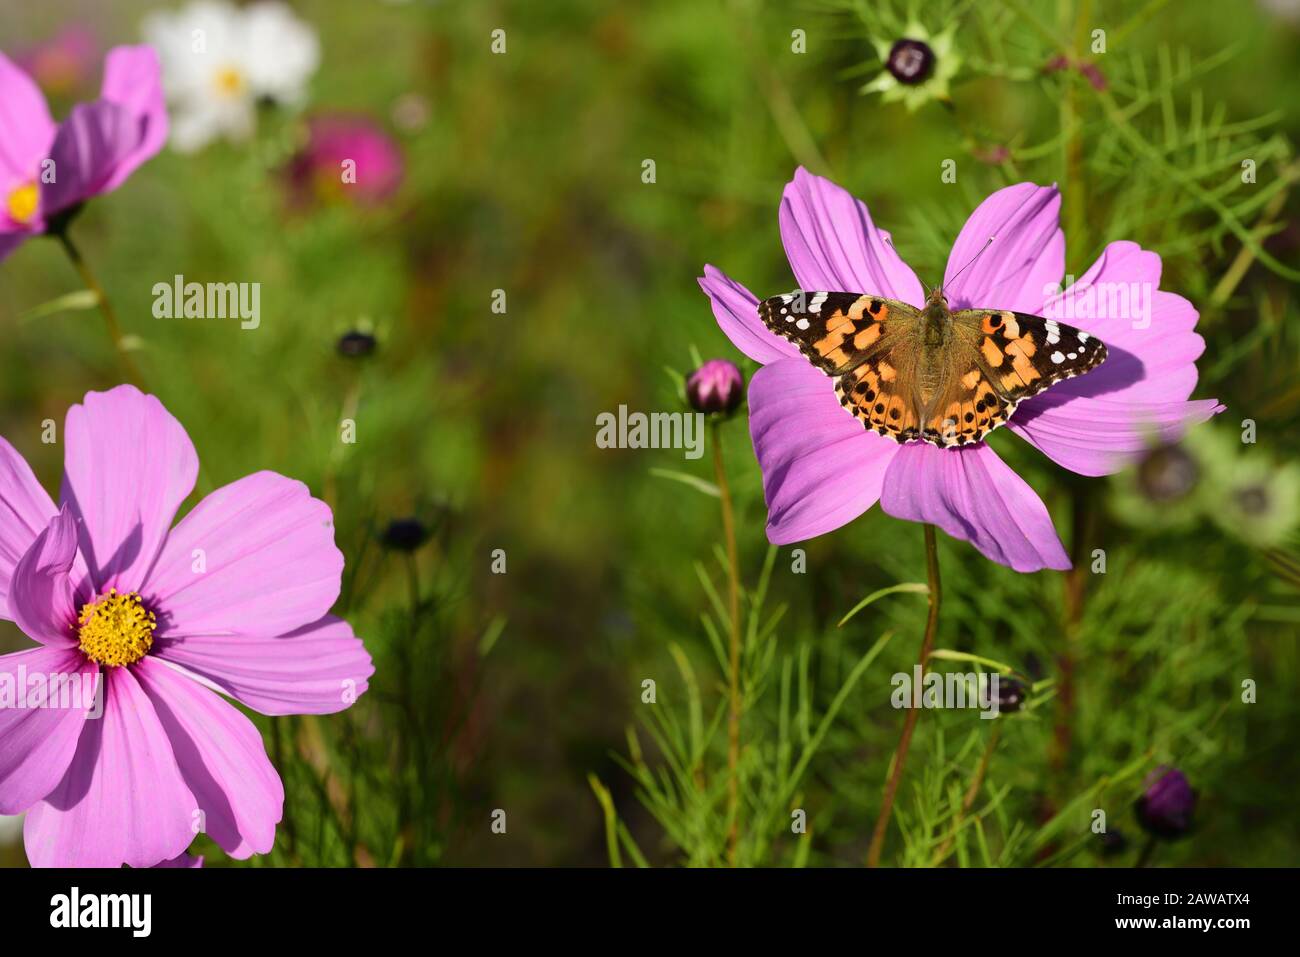 Close-up of a colorful bright flower meadow in summer with a colored butterfly looking for nectar. Stock Photo